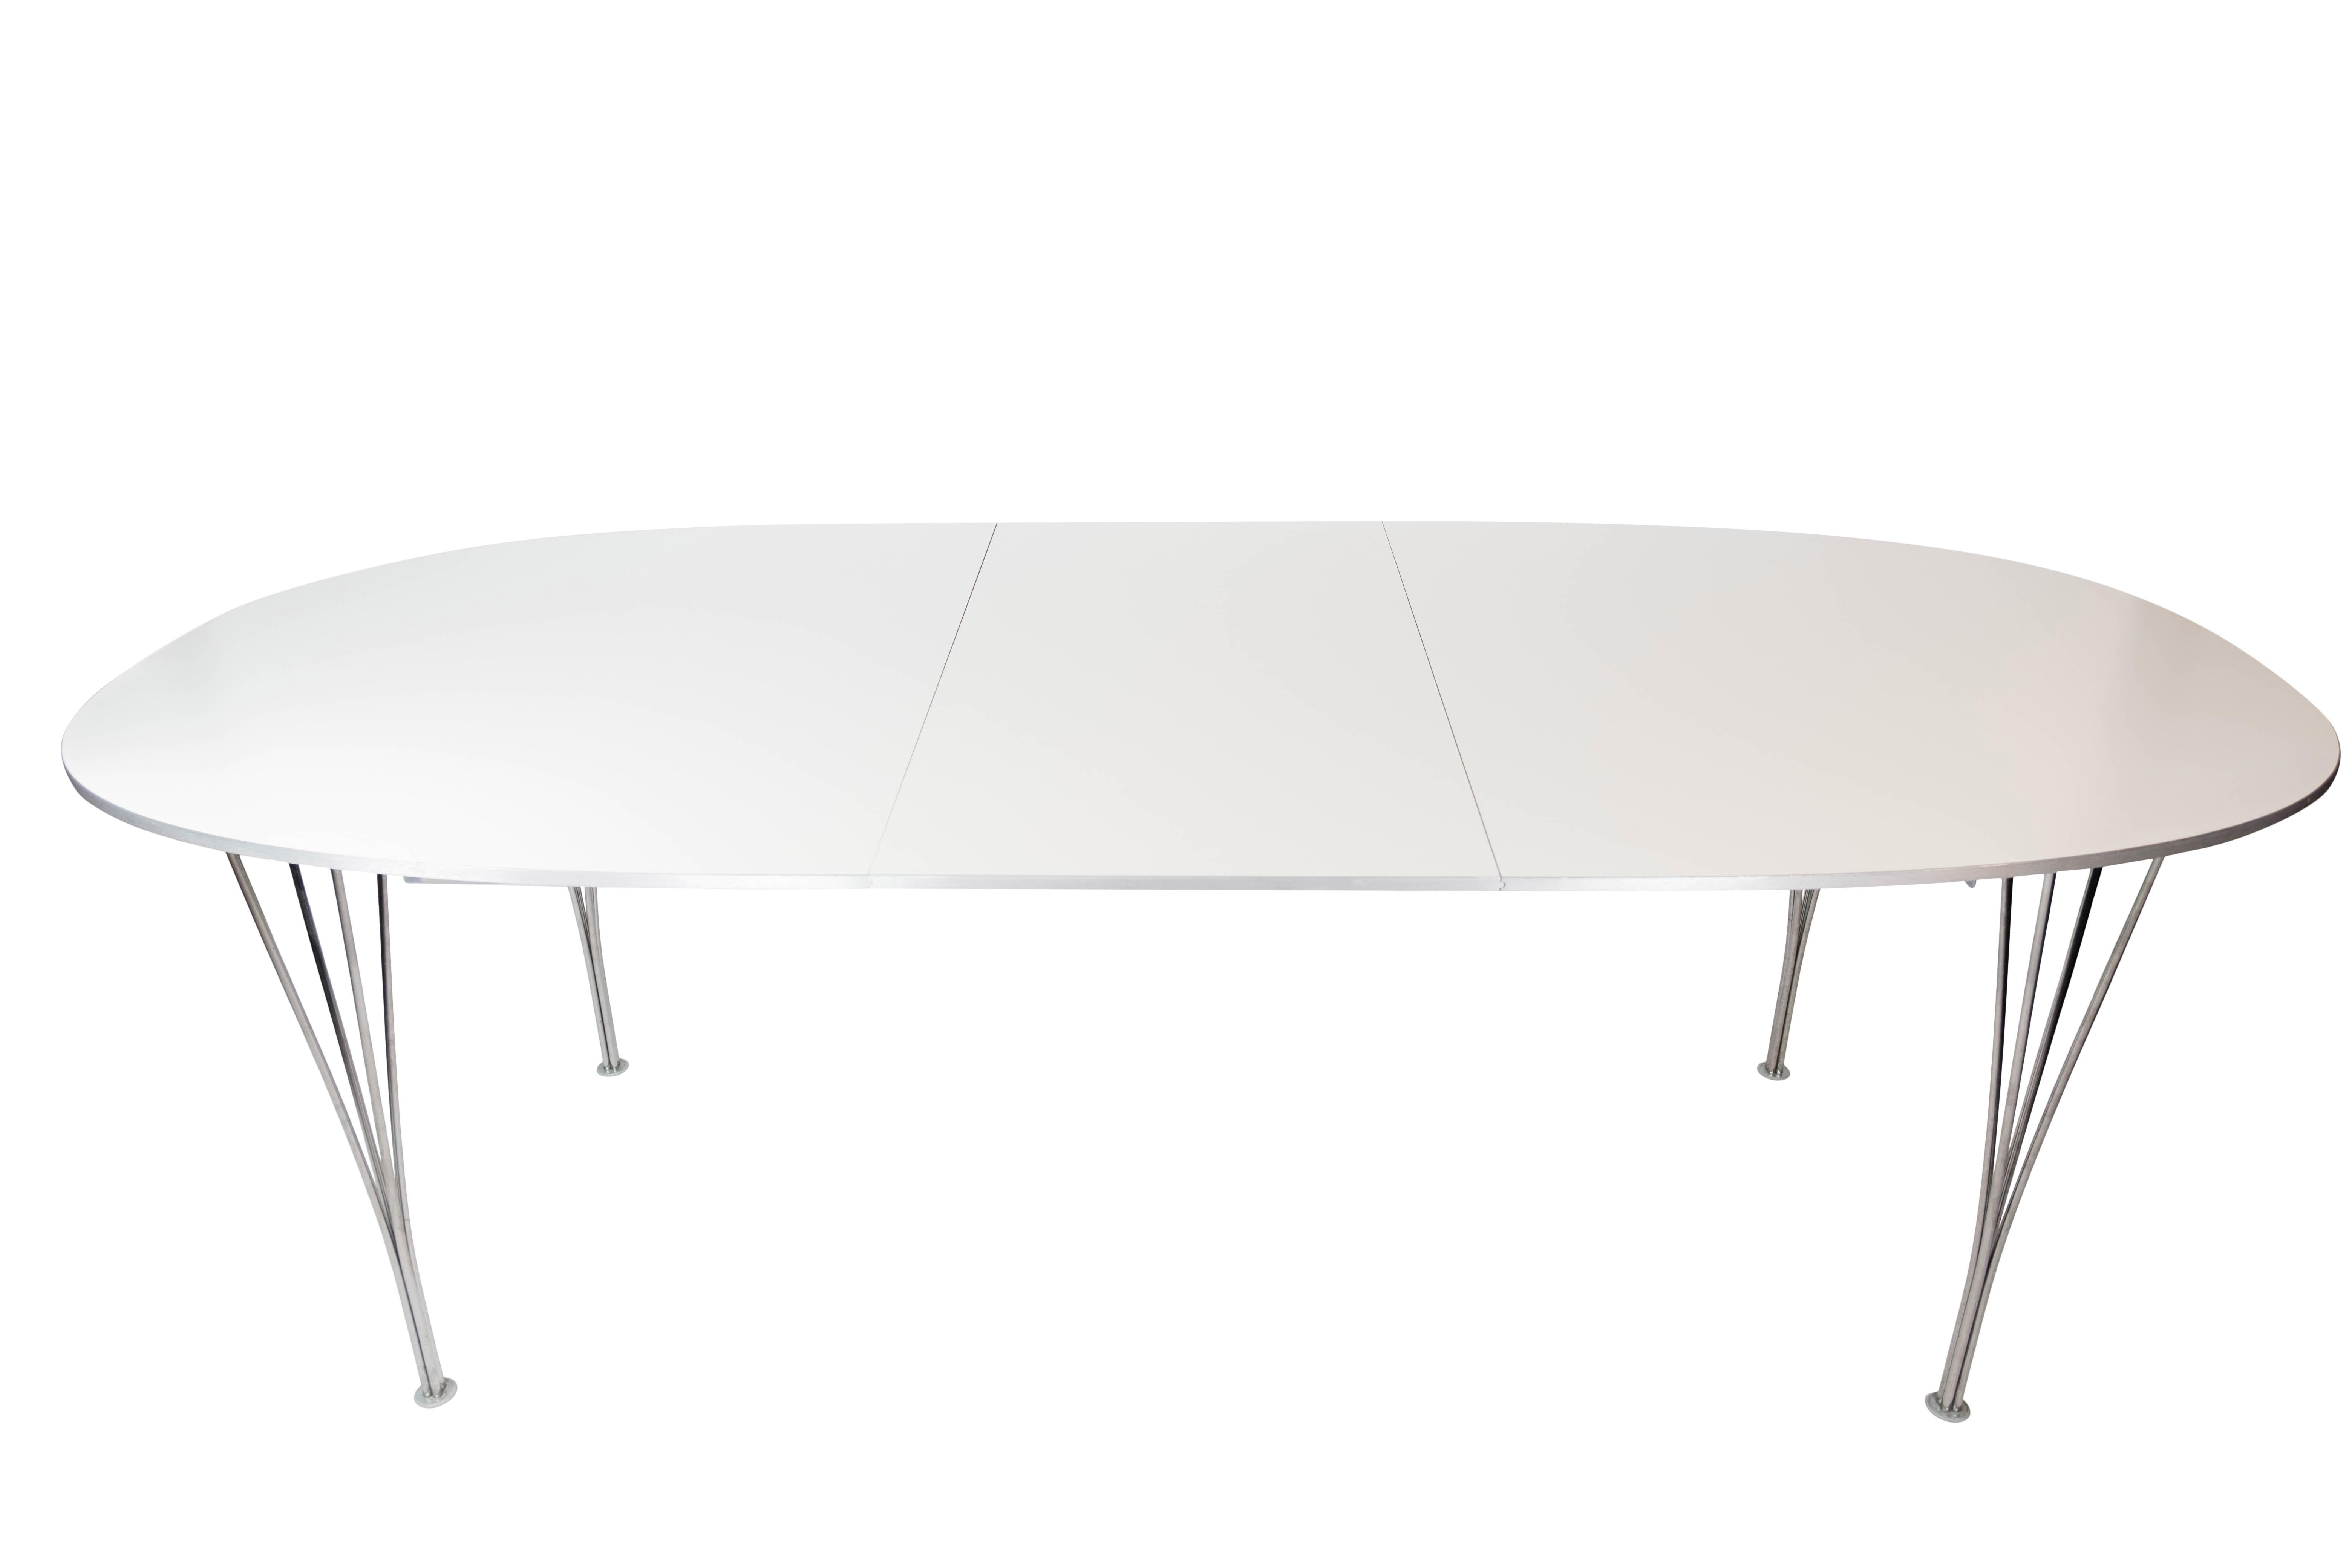 The Super Ellipse dining table, featuring a white laminate surface, embodies the collaborative design genius of Piet Hein and Arne Jacobsen, brought to life by Fritz Hansen in 1998. This iconic piece showcases a harmonious blend of form and